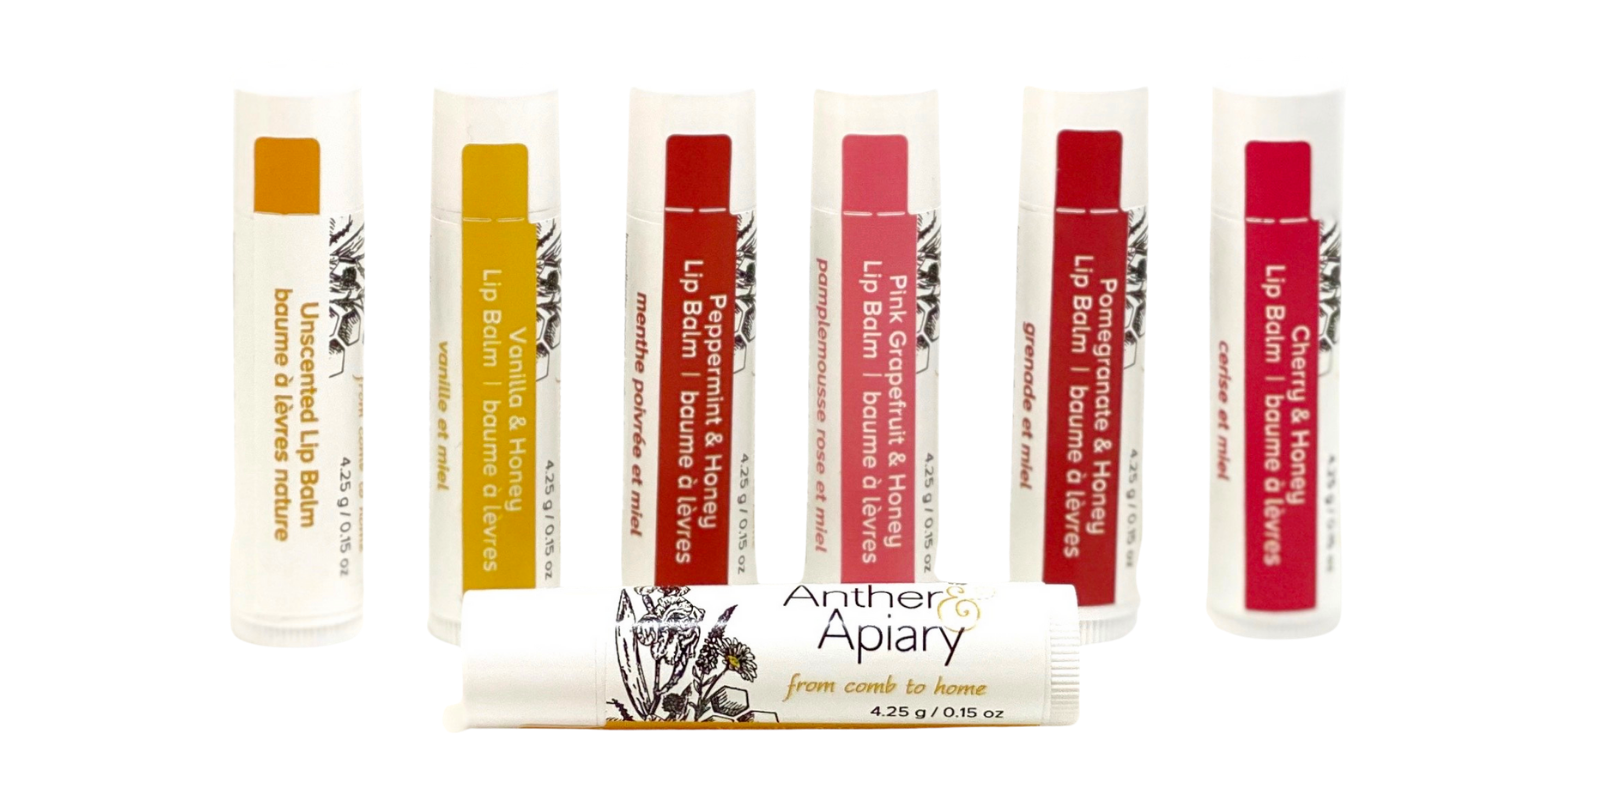 Anther Apiary Lip Balm